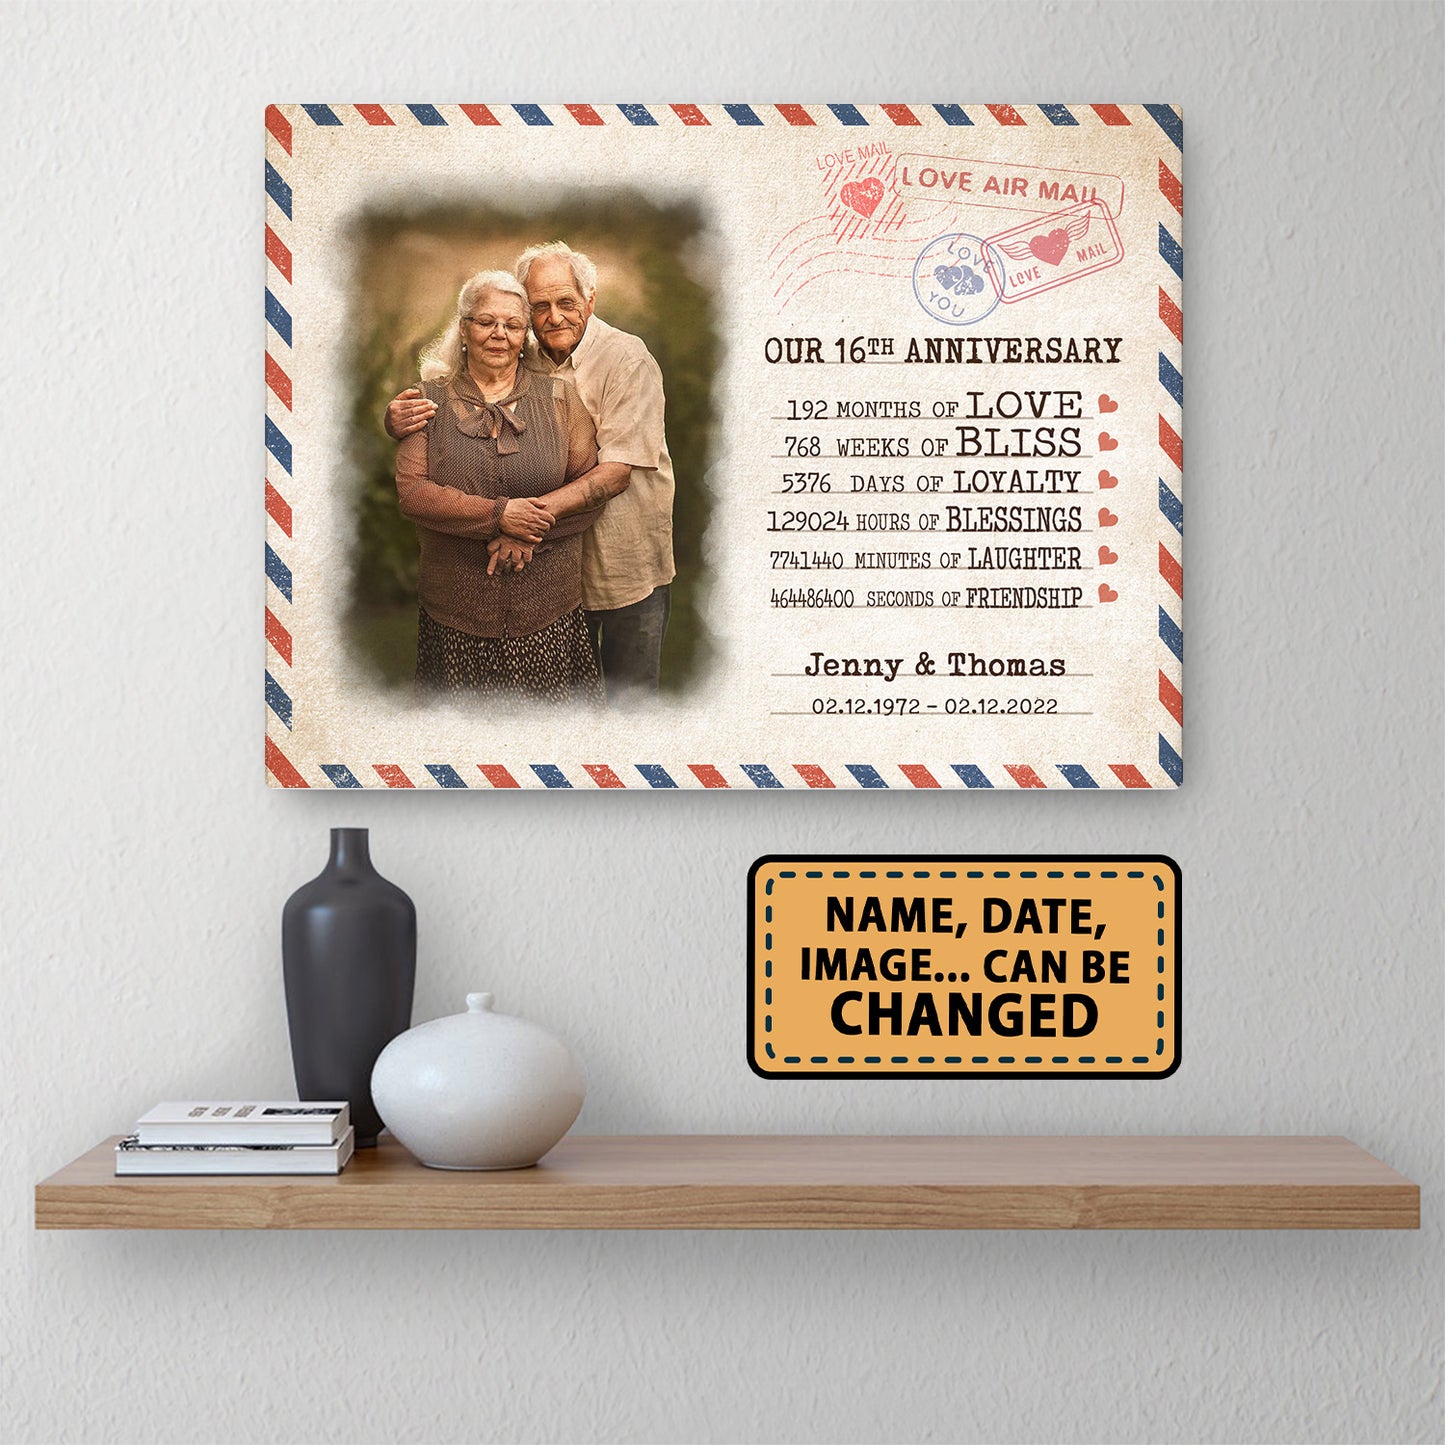 Our 16th Anniversary Letter Valentine Gift Personalized Canvas